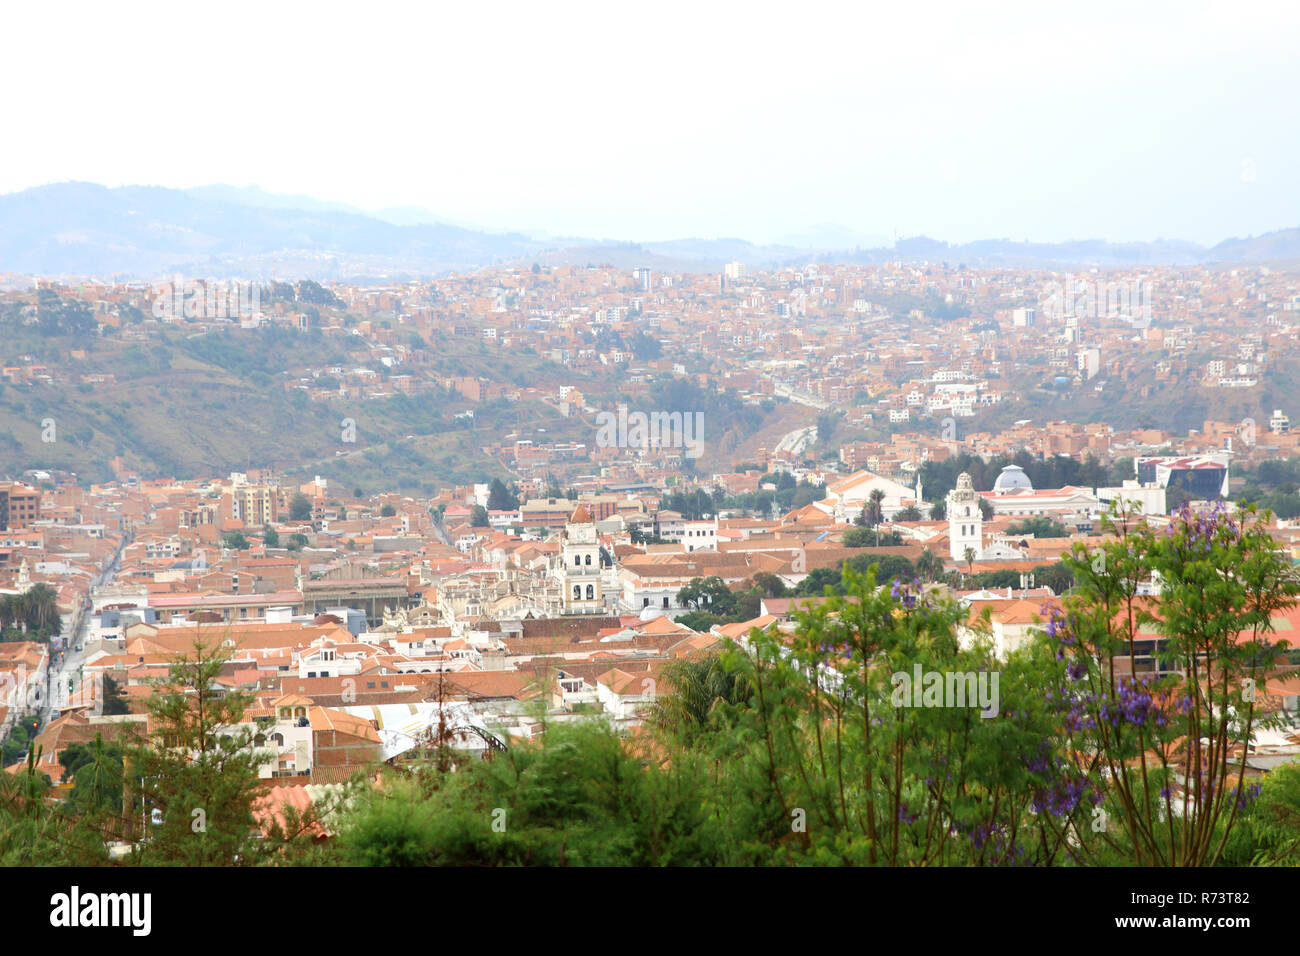 Aerial view of of Sucre, Bolivia with mountains visible in the background. City view. Stock Photo